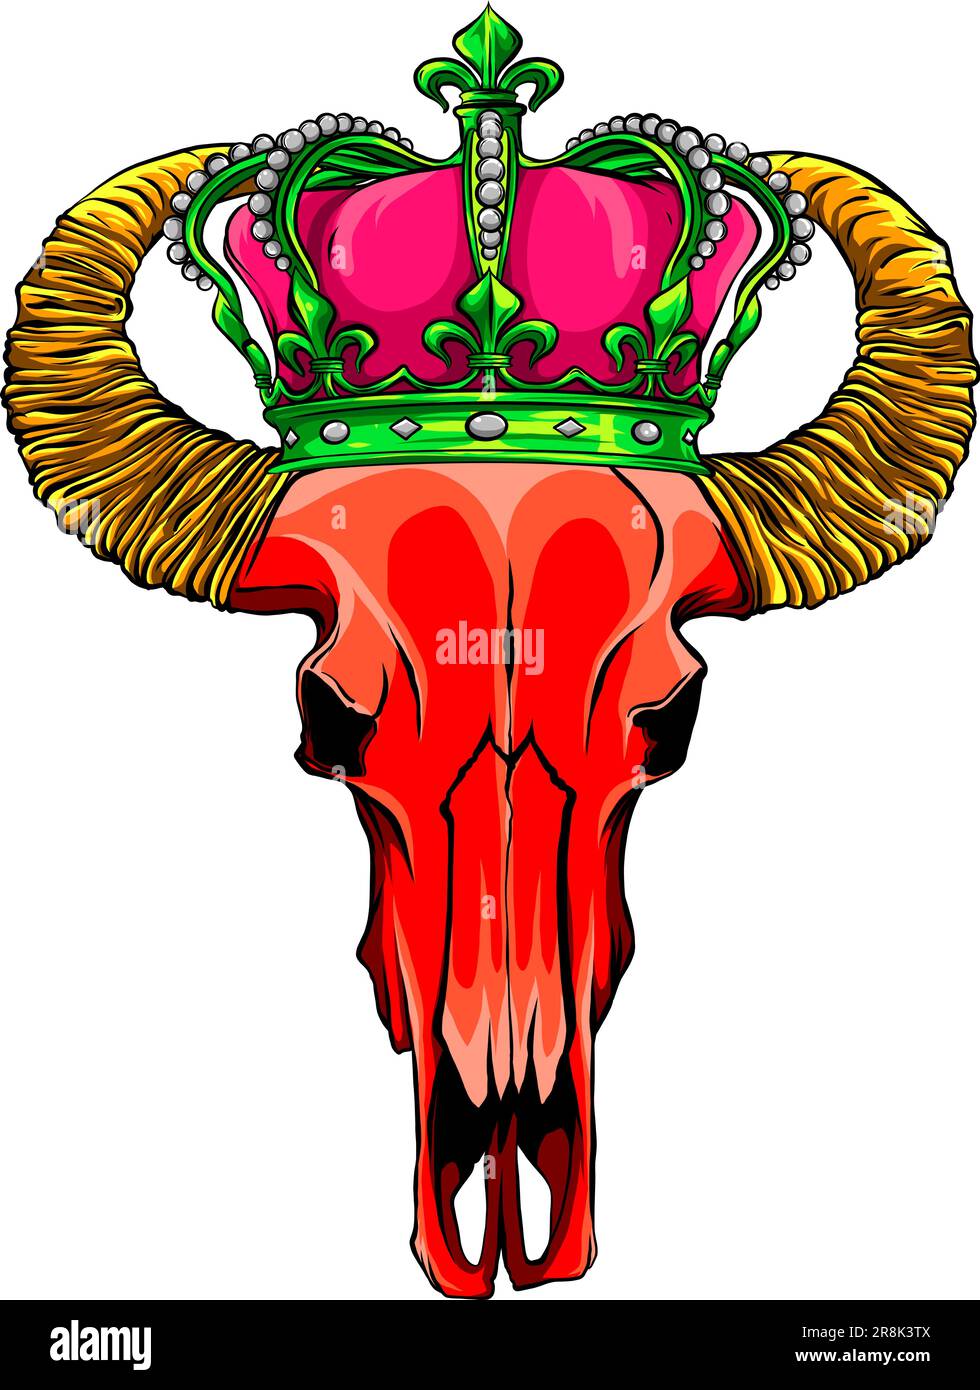 vector illustration of a bull skull wearing a crown with diamonds Stock Vector